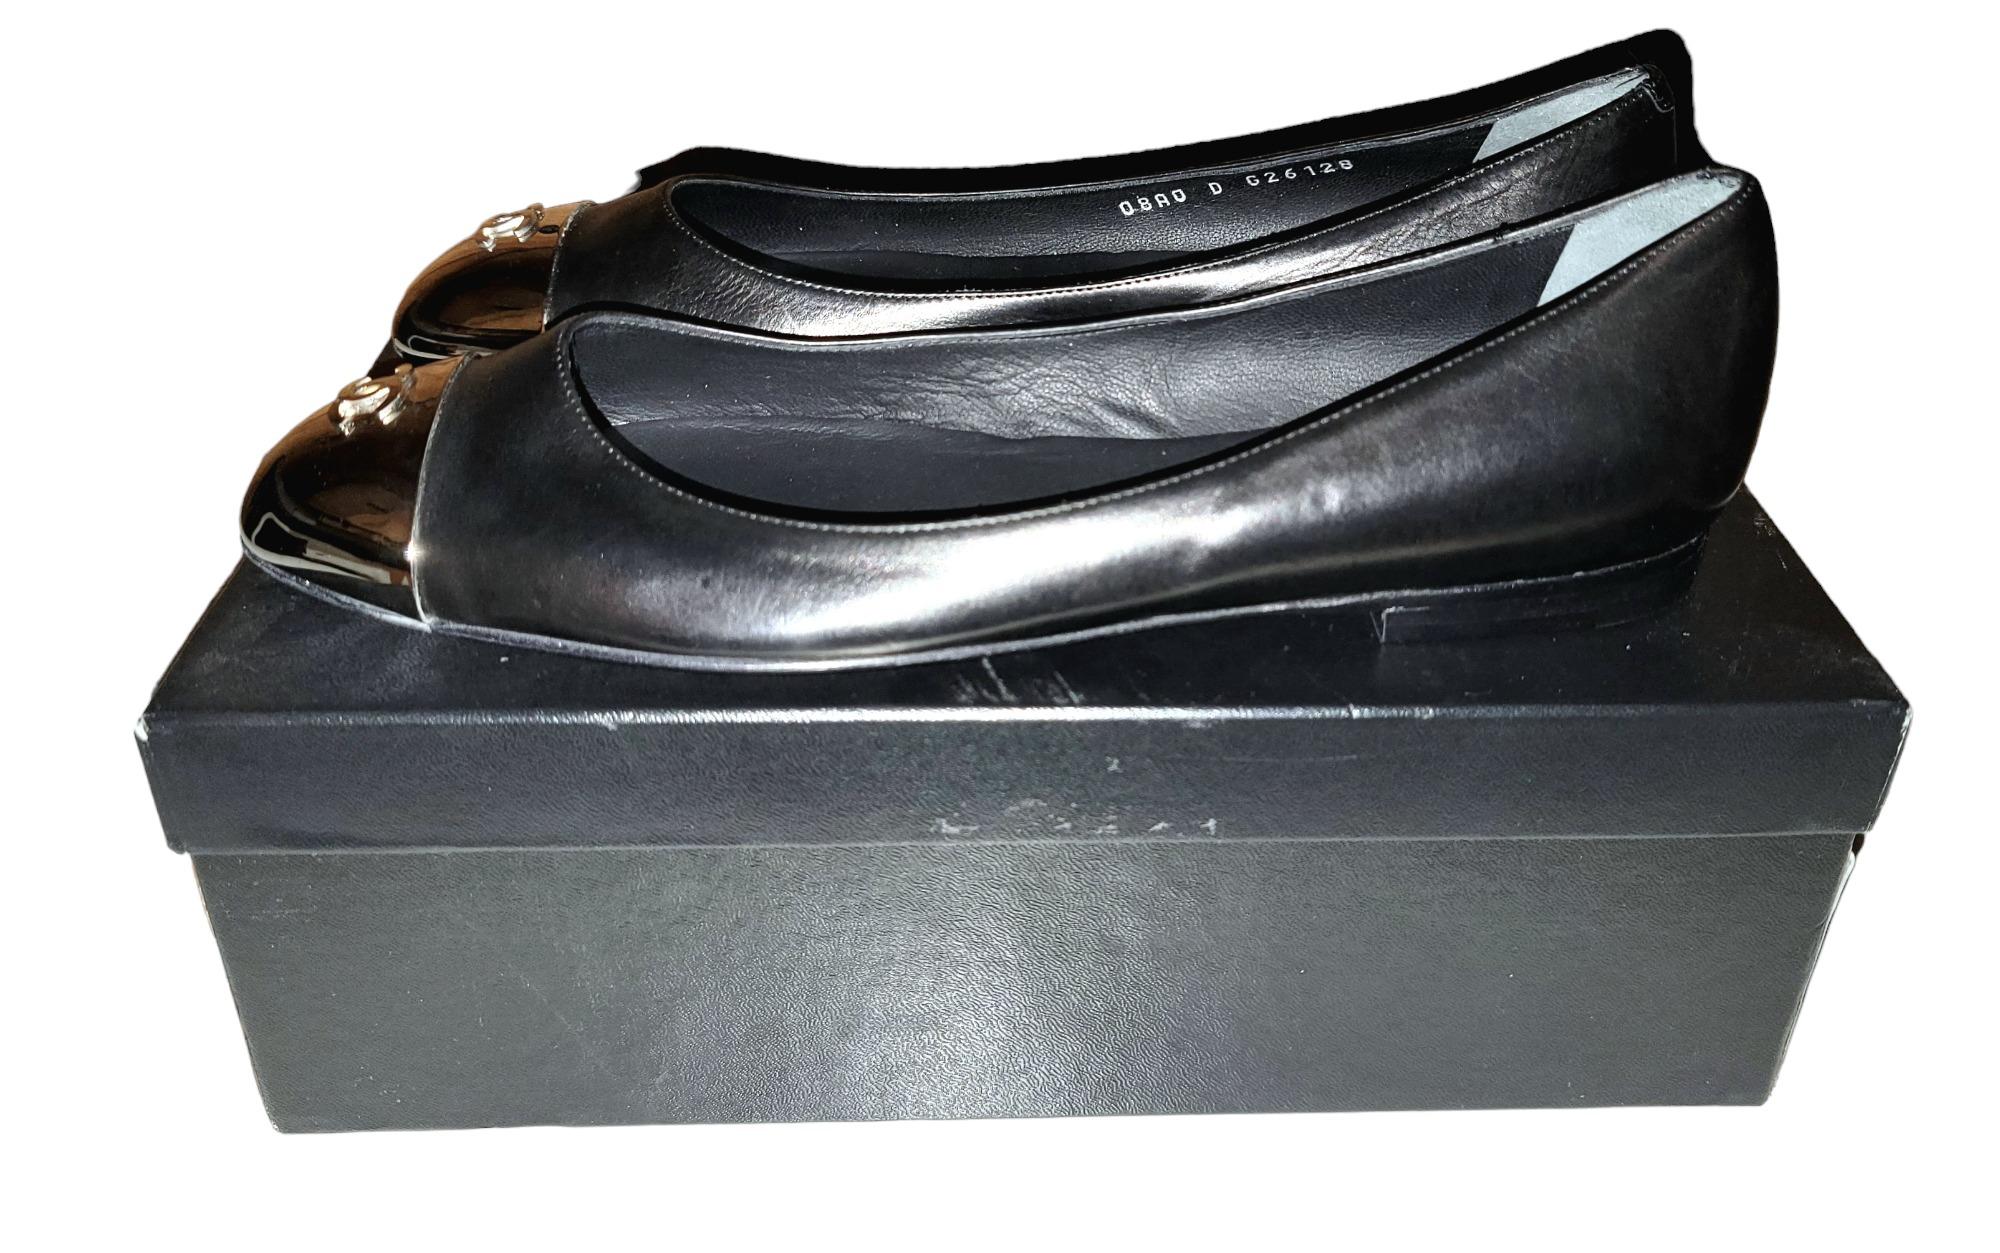 Rare Authentic Chanel size 39 black leather with chrome CC accent at front of flats. The Chanel interior sole has the patent Chanel logo inside. Size 39 on the bottom of the soles. Beautiful all occasion shoes.